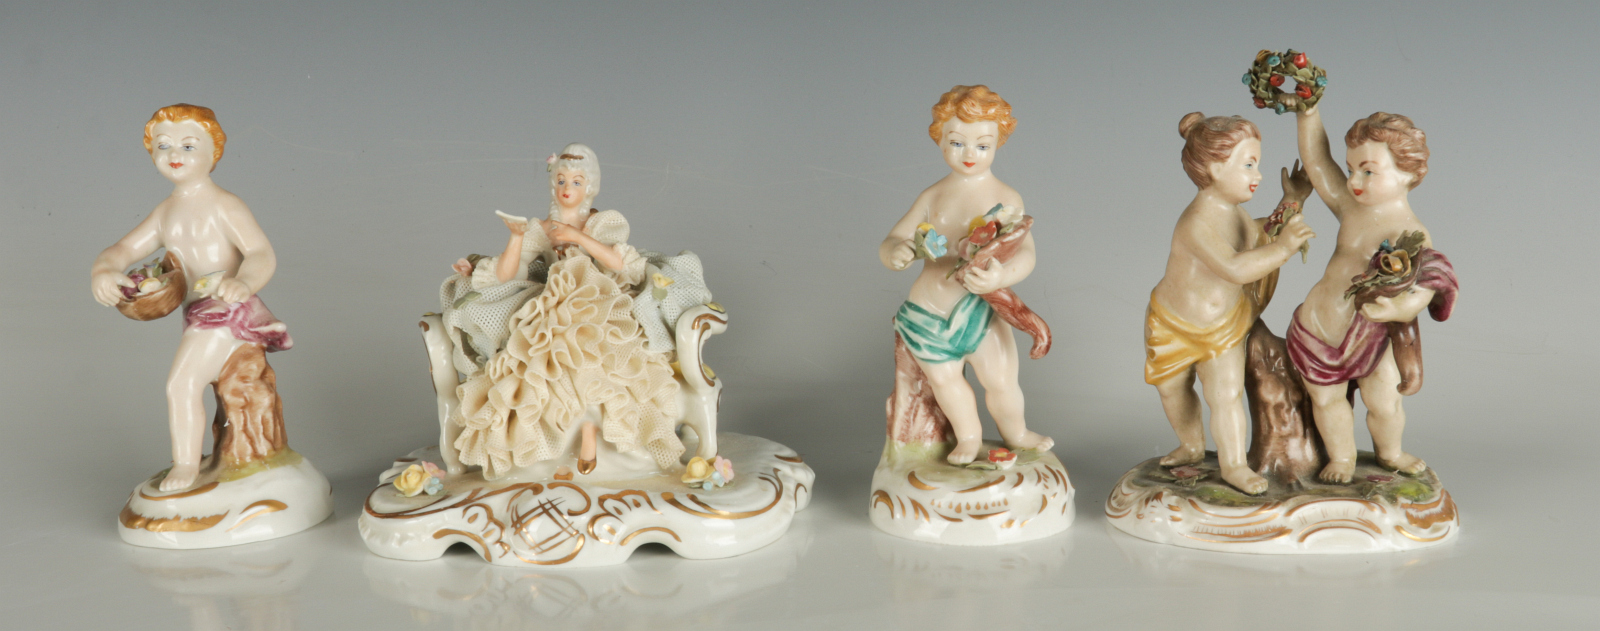 A COLLECTION OF EARLY 20TH C. PORCELAIN FIGURES